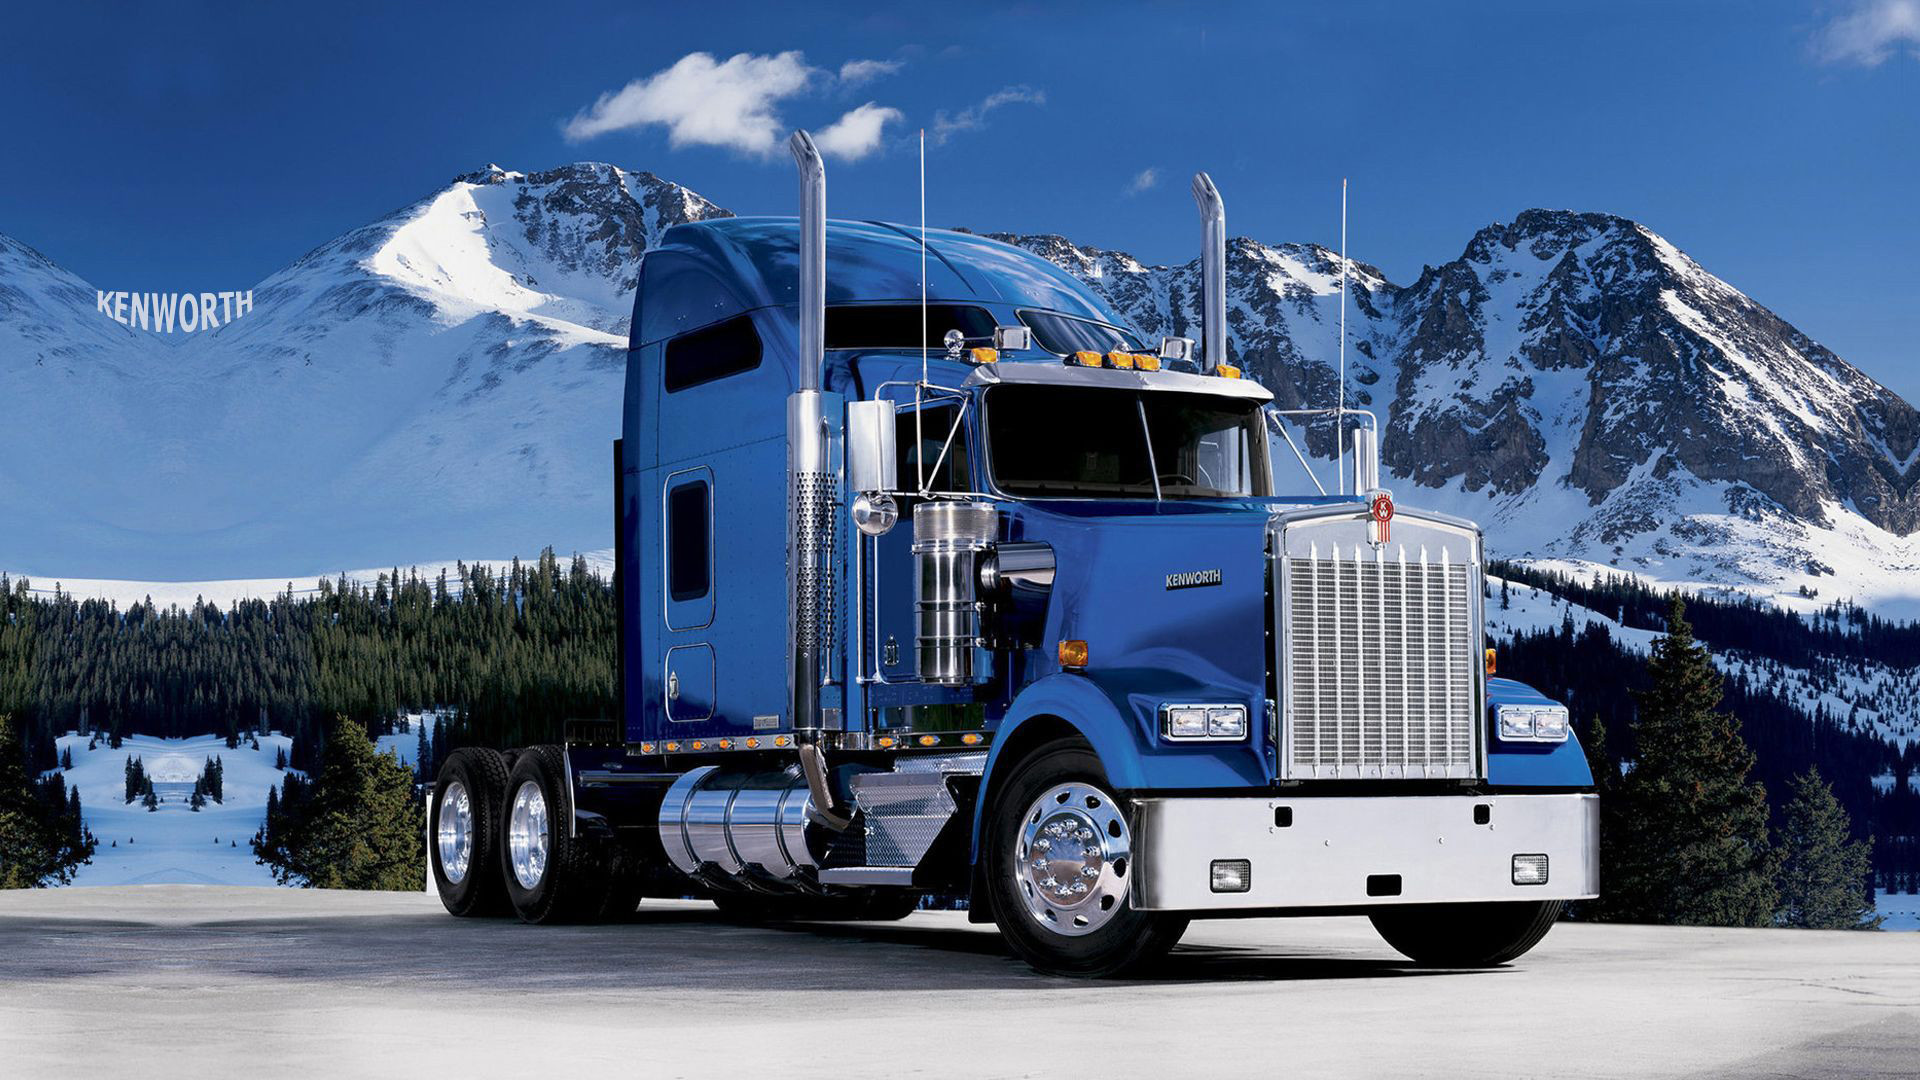 1920x1080 Kenworth truck in the mountains: